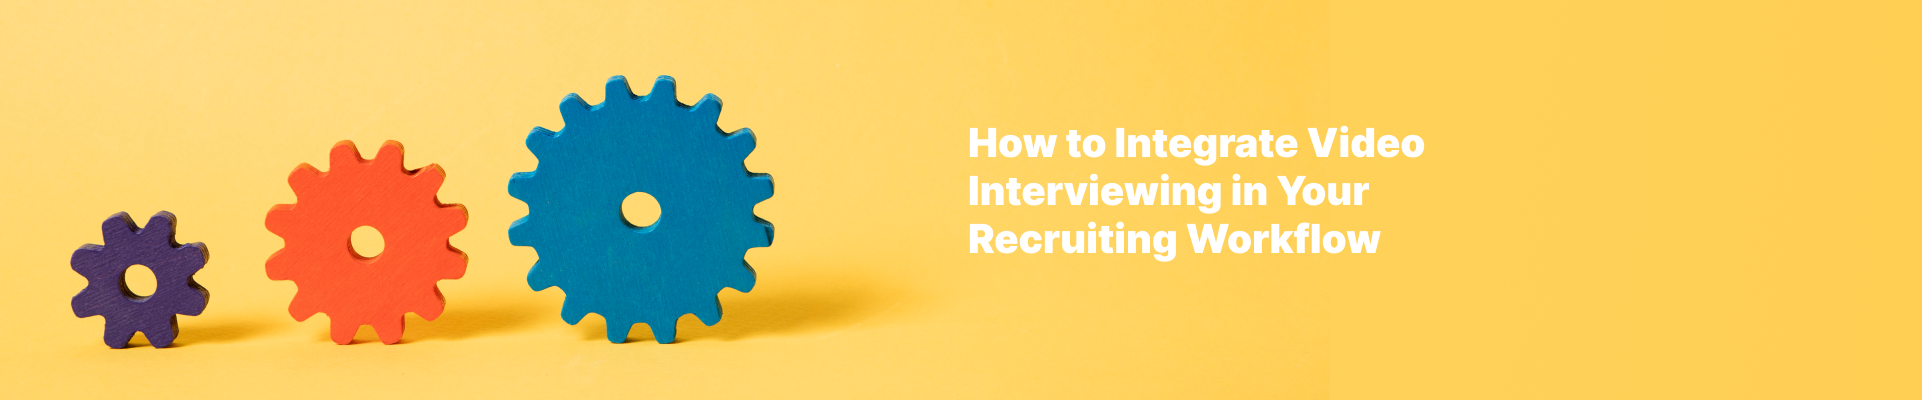 How to Integrate Video Interviewing in Your Recruiting Workflow